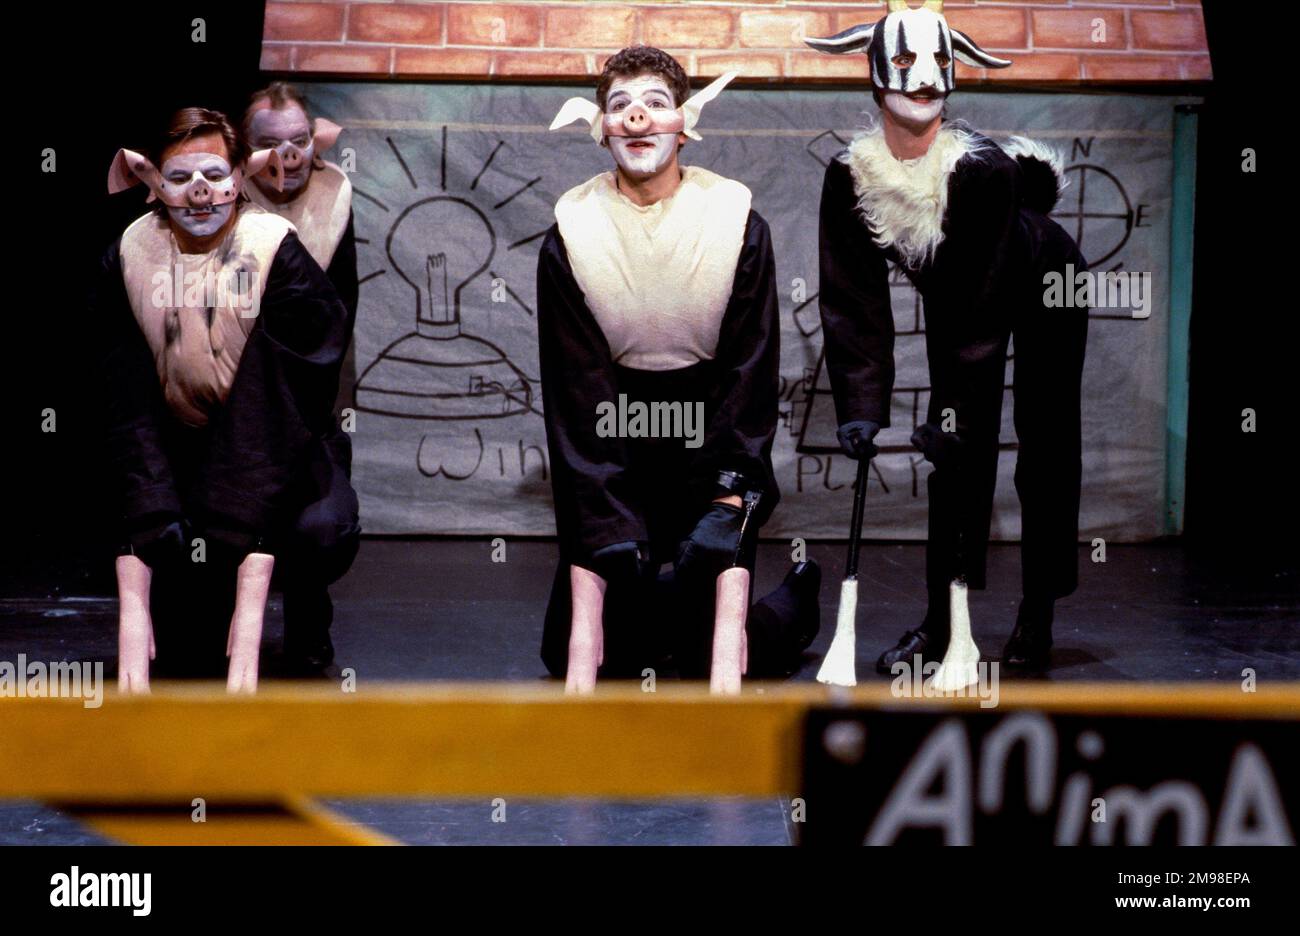 from left: Barrie Rutter (Napoleon), David Ryall (Squealer - rear), Greg Hicks (Snowball) in ANIMAL FARM by George Orwell at the Cottesloe Theatre, National Theatre (NT), London SE1  25/04/1984  adapted & directed by Peter Hall  design: Jennifer Carey  lighting: John Bury  movement: Stuart Hopps Stock Photo